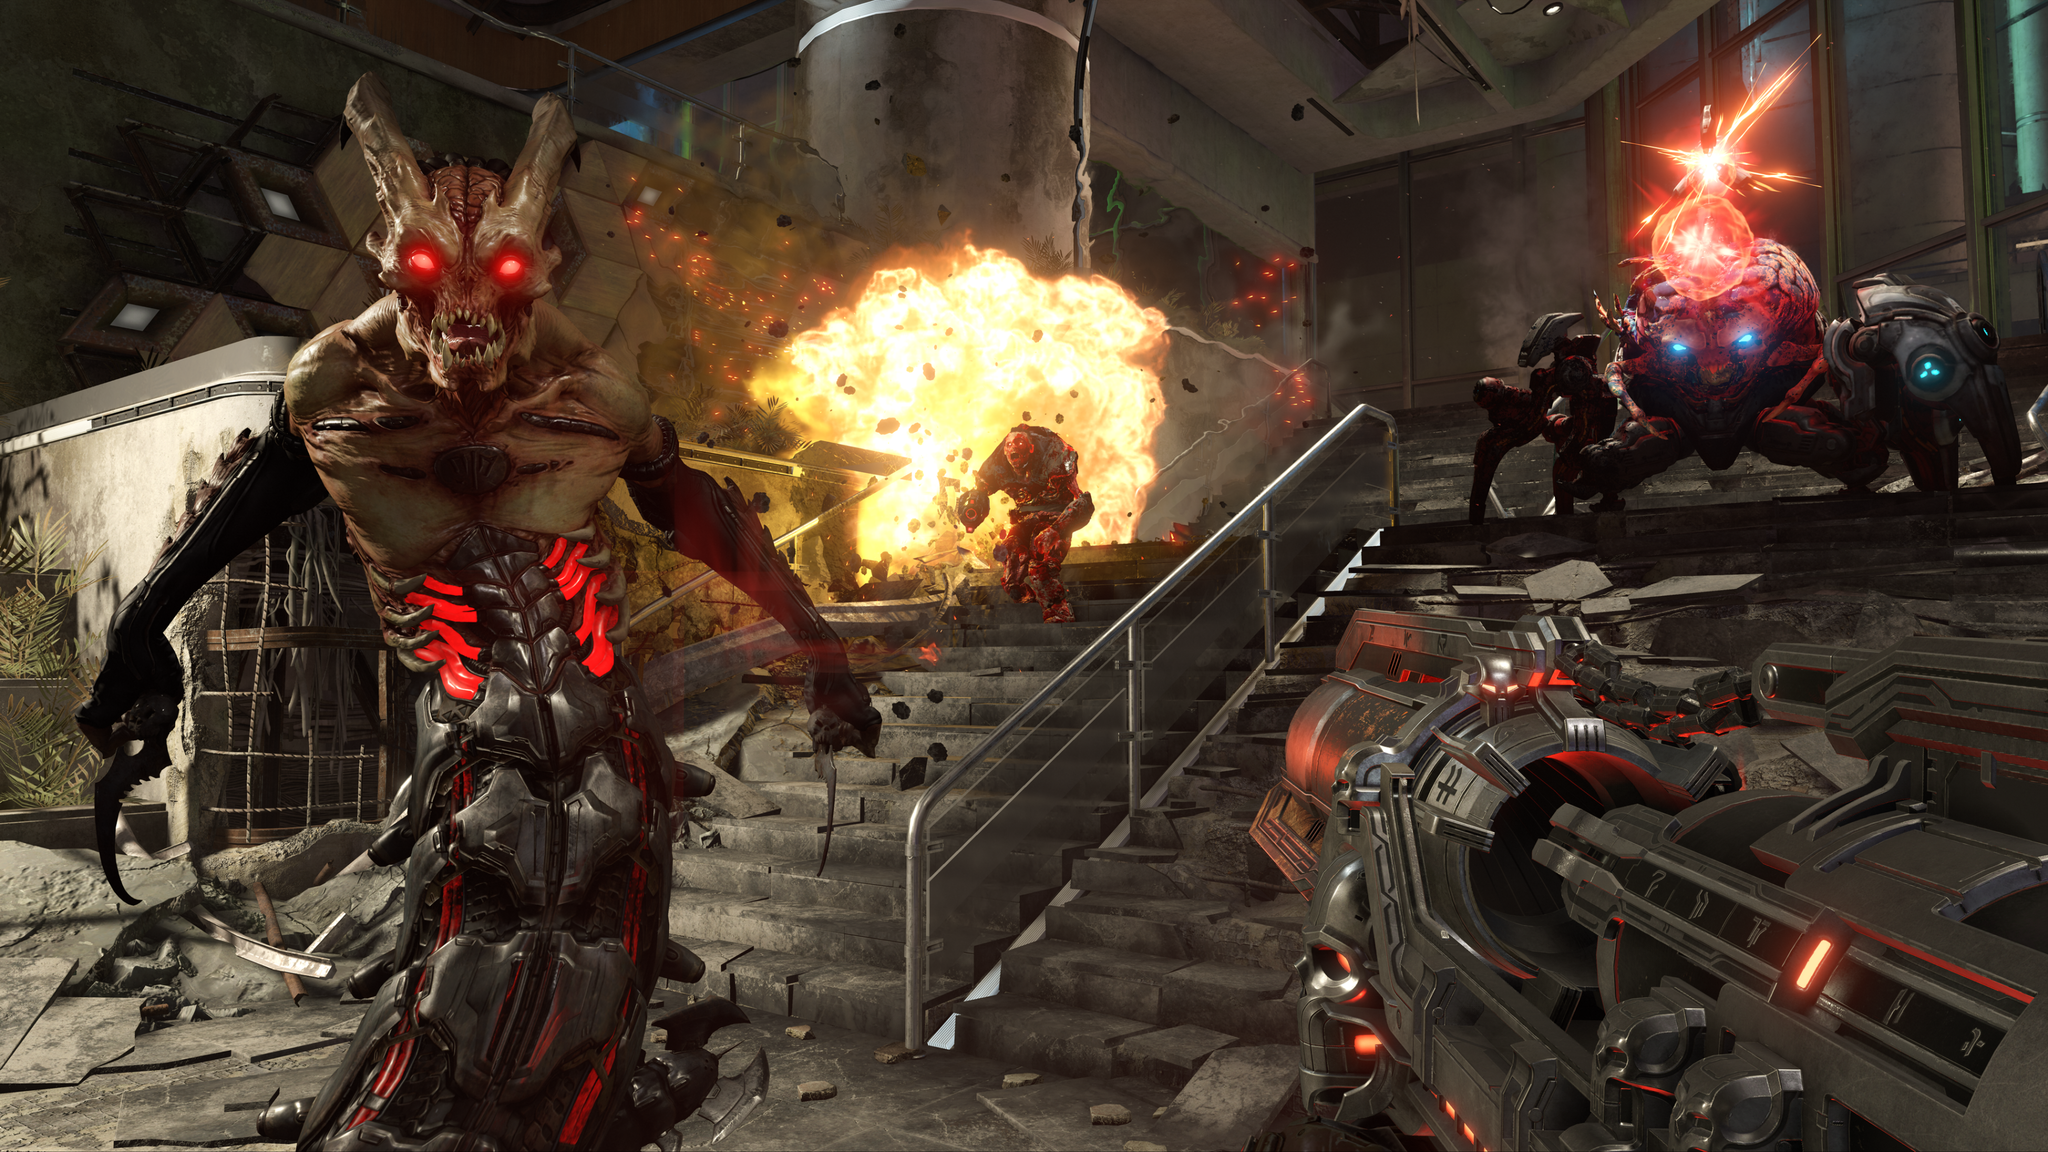 Image for Doom Eternal’s Souls-style invasions are seen as an “endgame” activity for masterful players